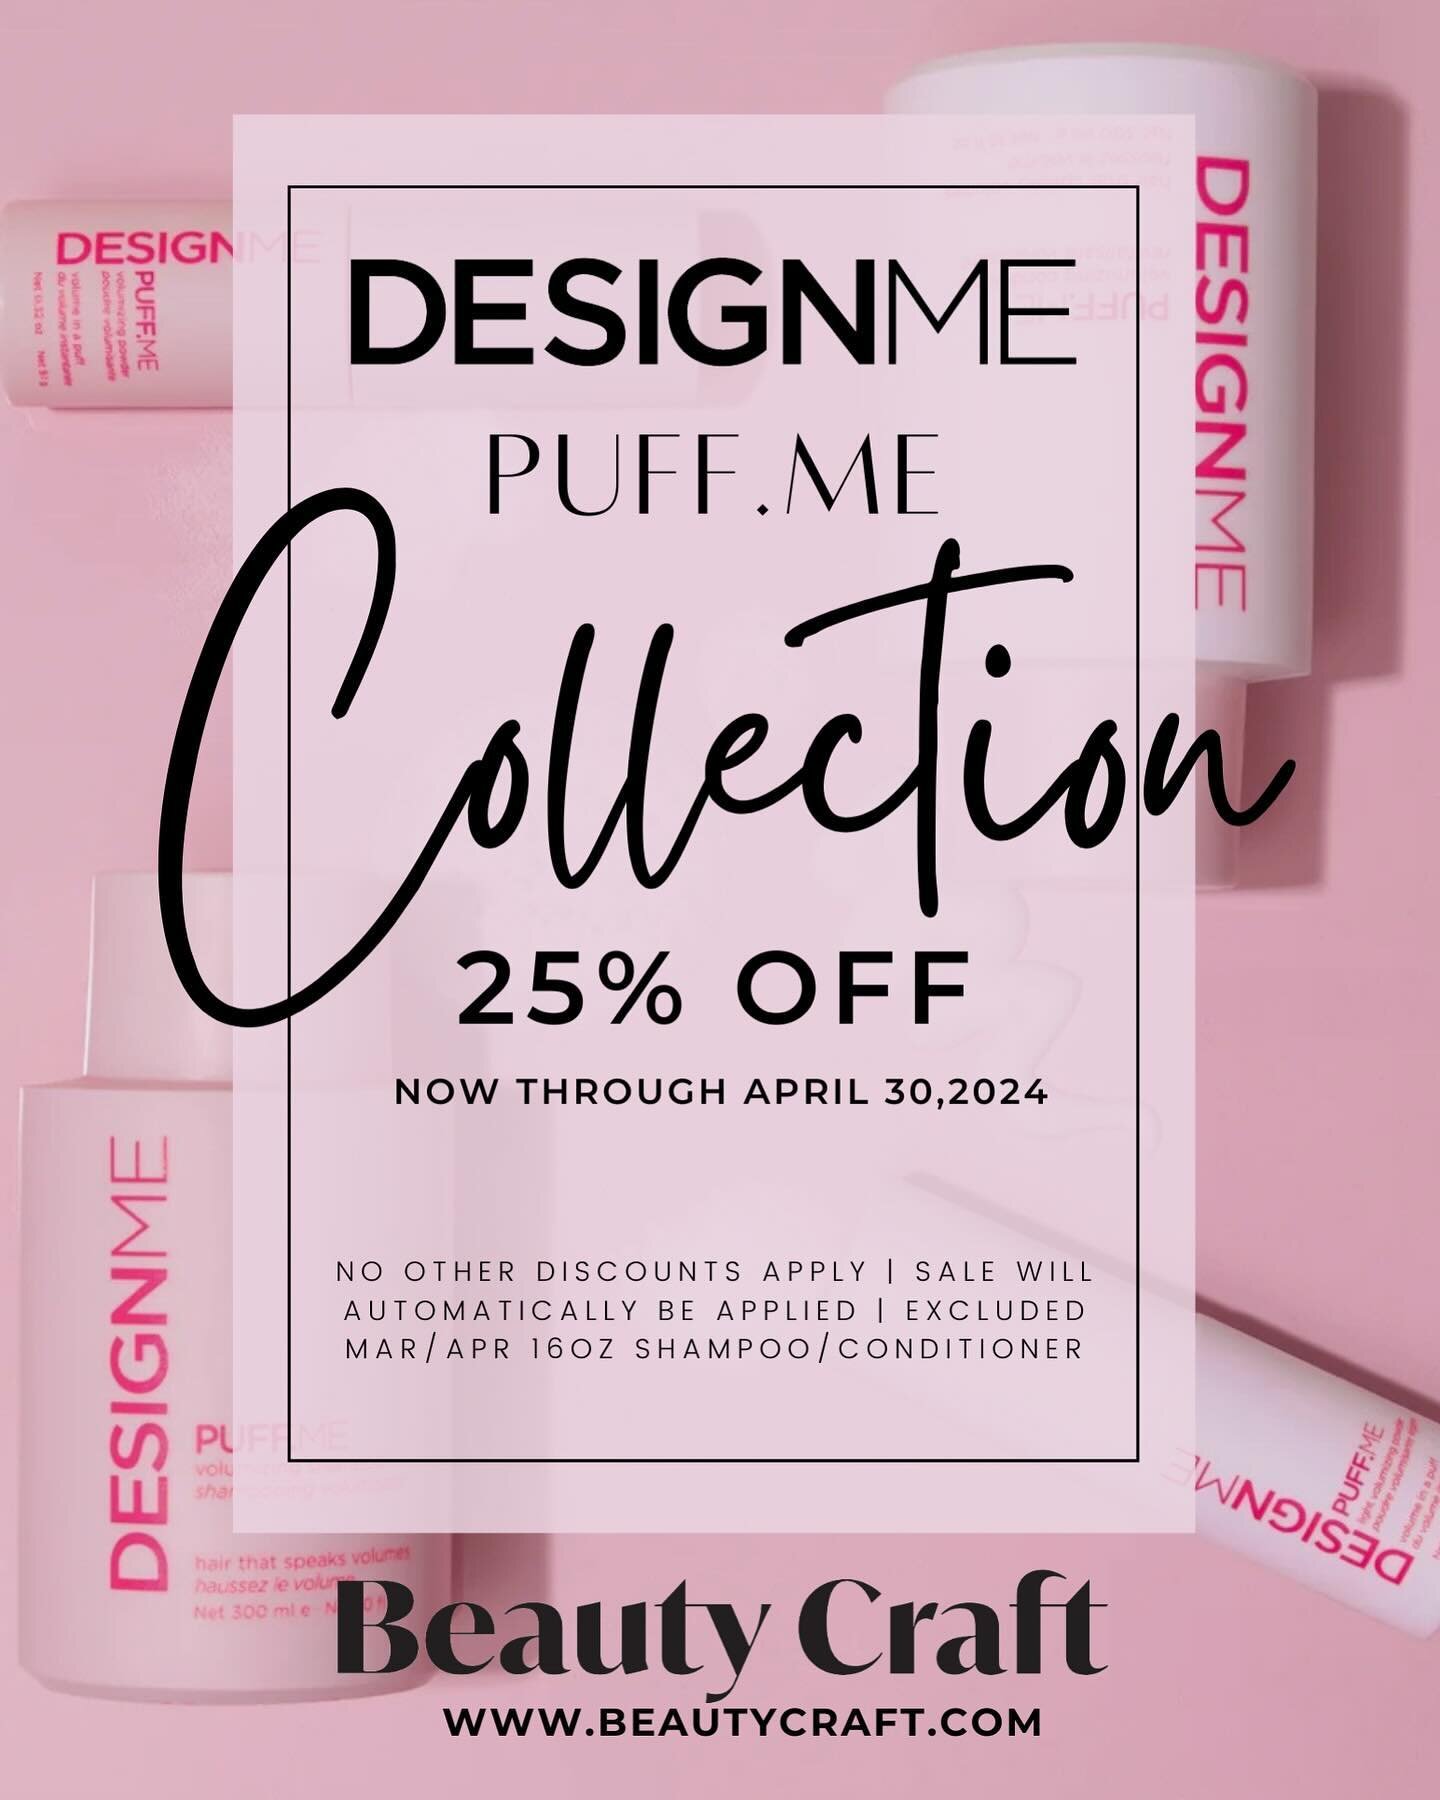 ‼️ FLASH SALE ALERT ‼️ now through April 30th, enjoy 25% off the @designmehair Puff.ME collection at Beauty Craft 💕

➡️ Connect with your Beauty Craft salon consultant to order | visit your local Beauty Craft store | shop online at www.beautycraft.c